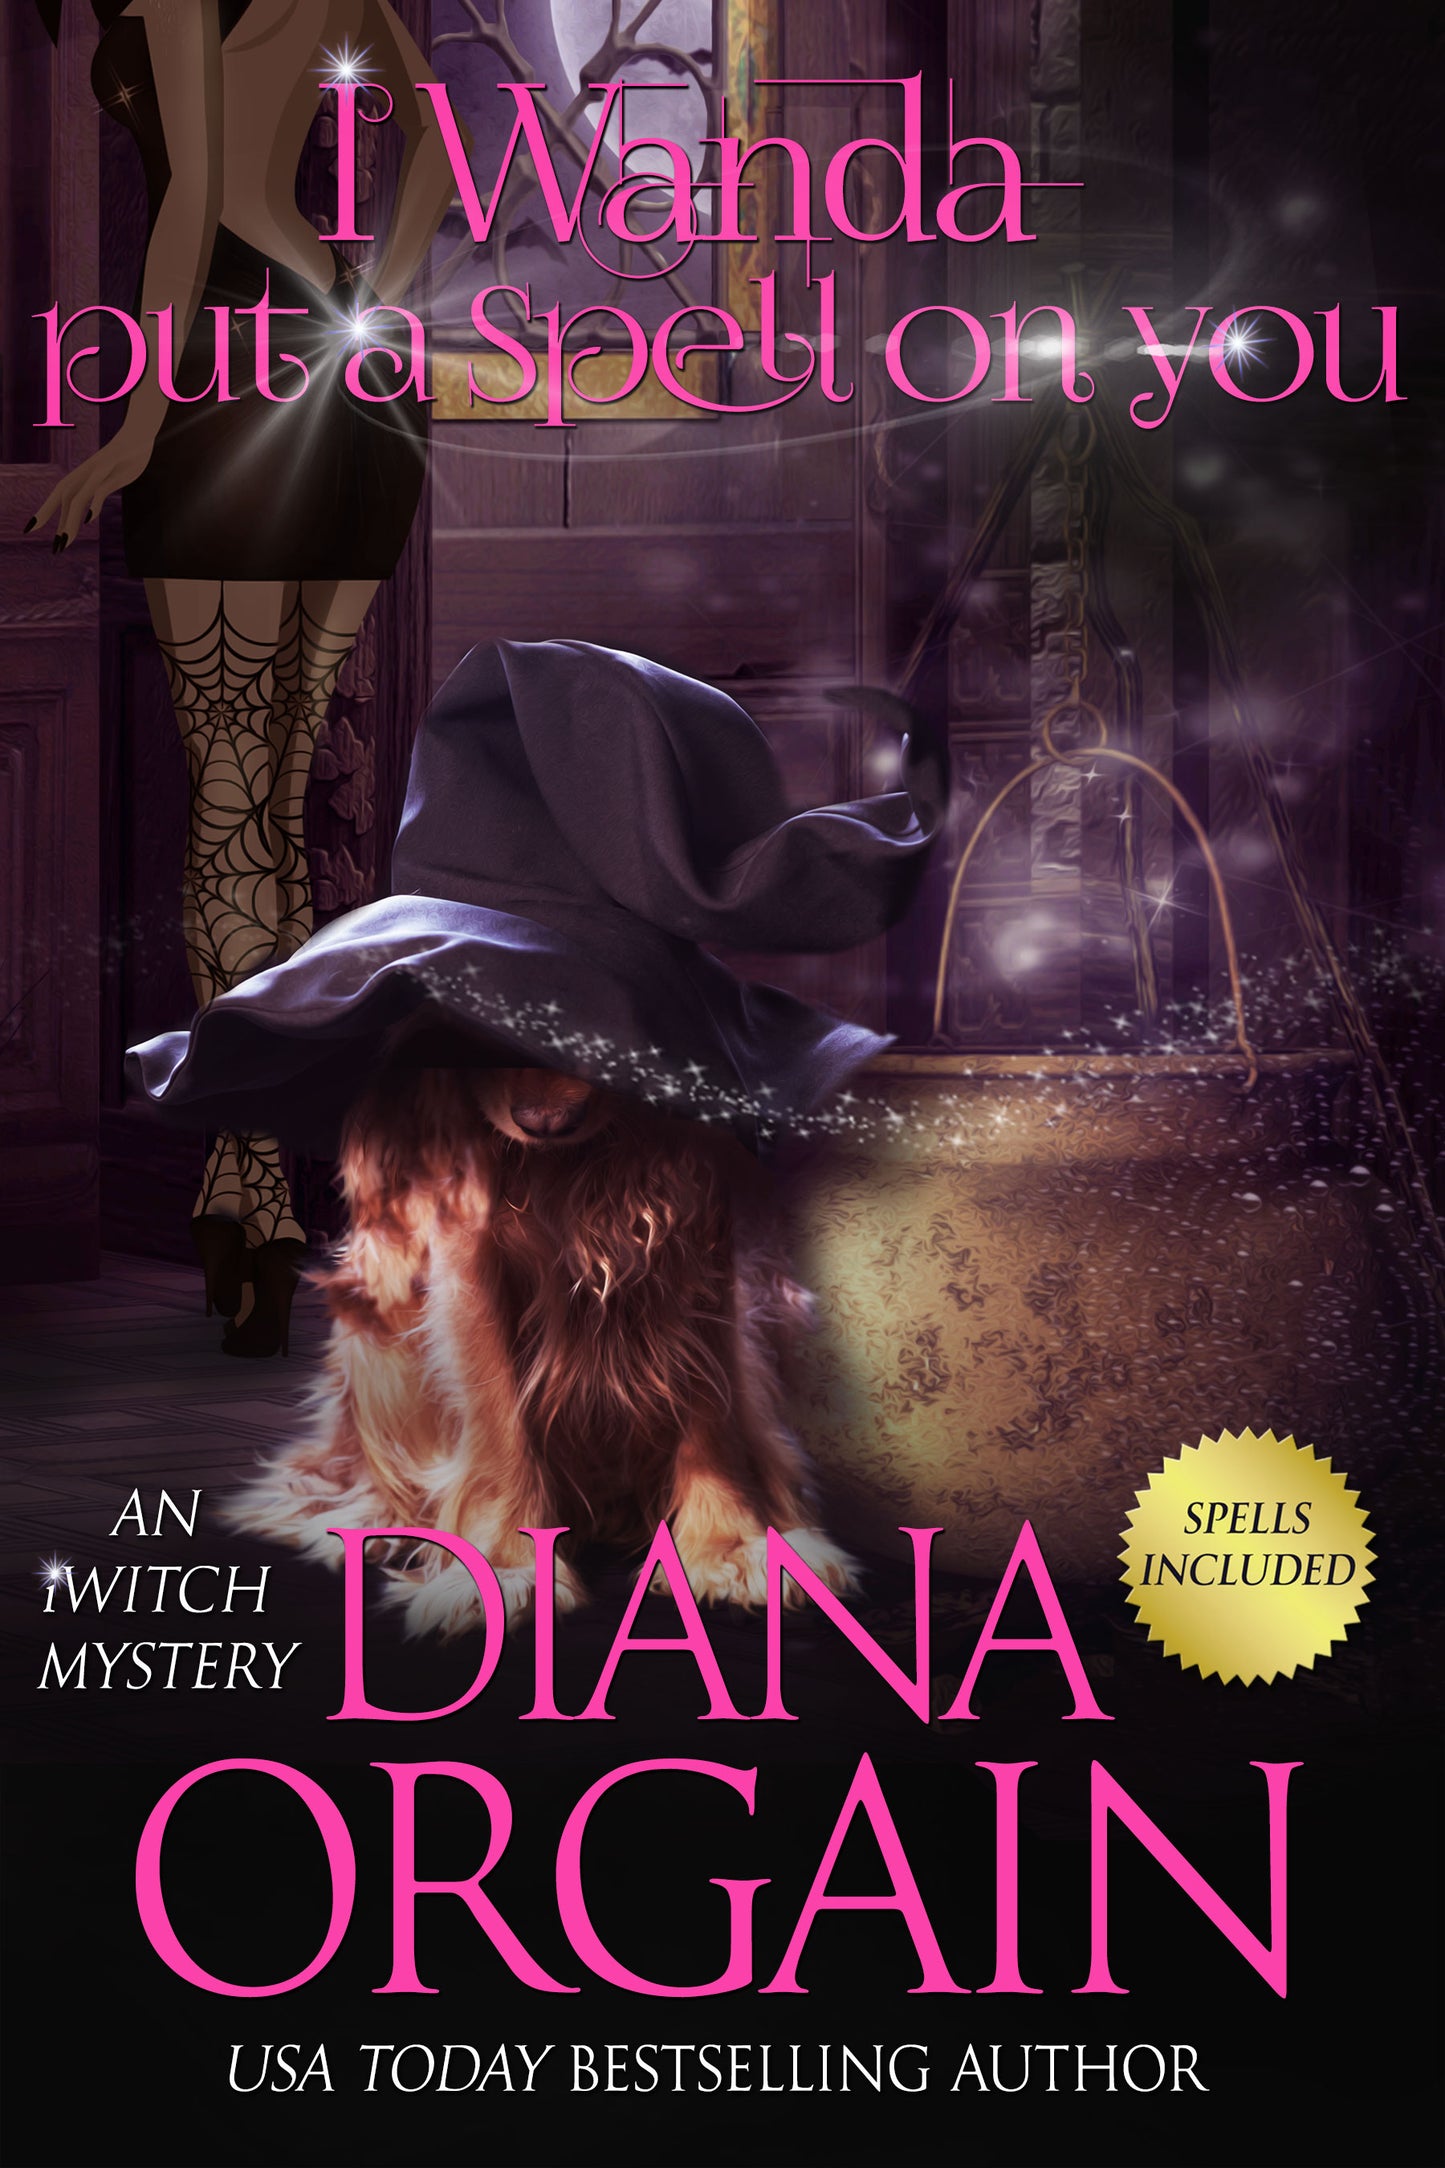 I Wanda Put a Spell on You (Book 2 in the iWitch Mystery Series) - Diana Orgain